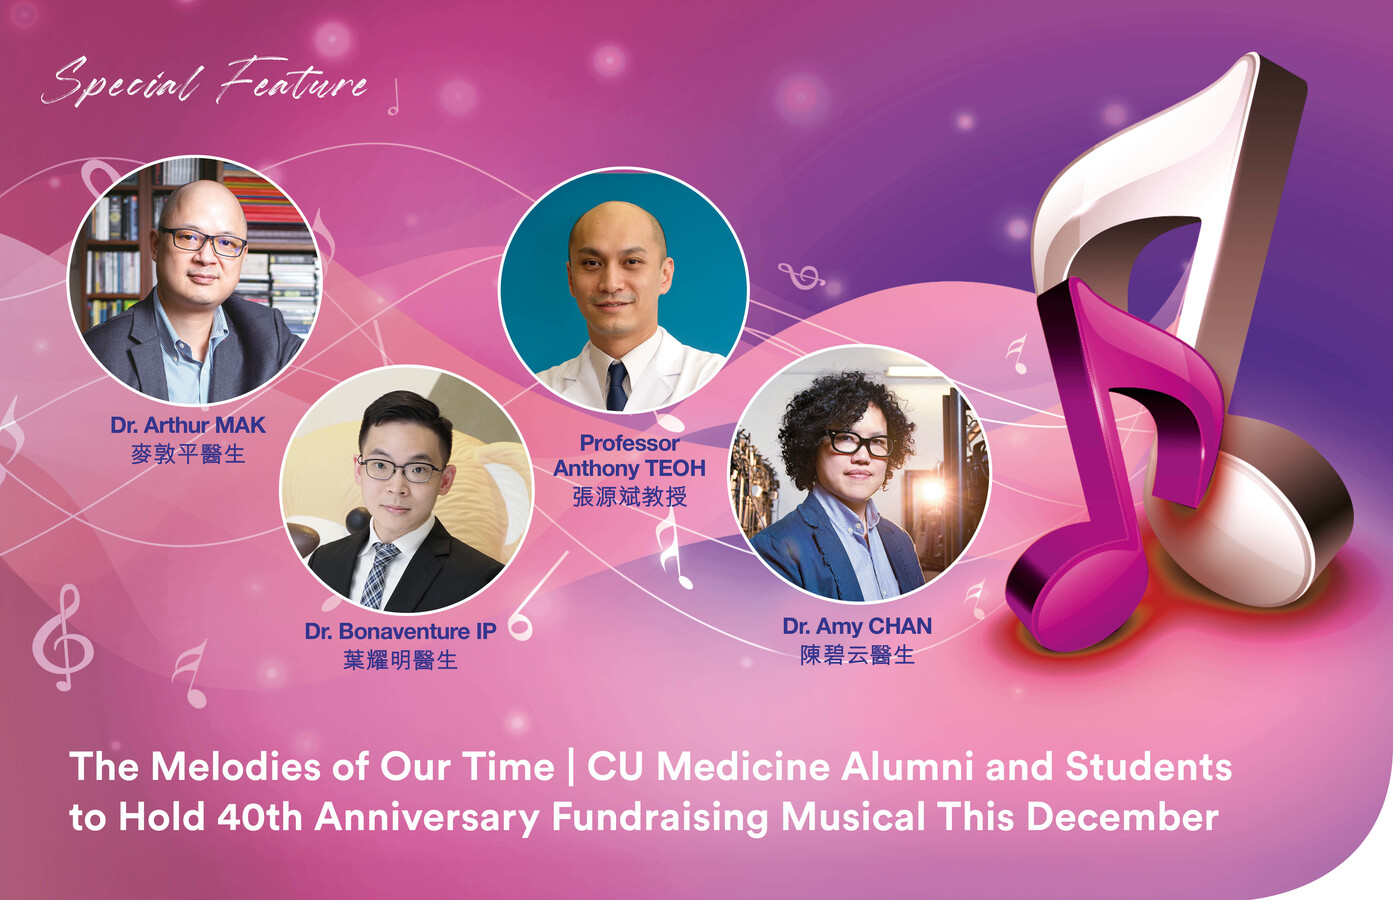 CU Medicine Alumni and Students to Hold 40th Anniversary Fundraising Musical This December